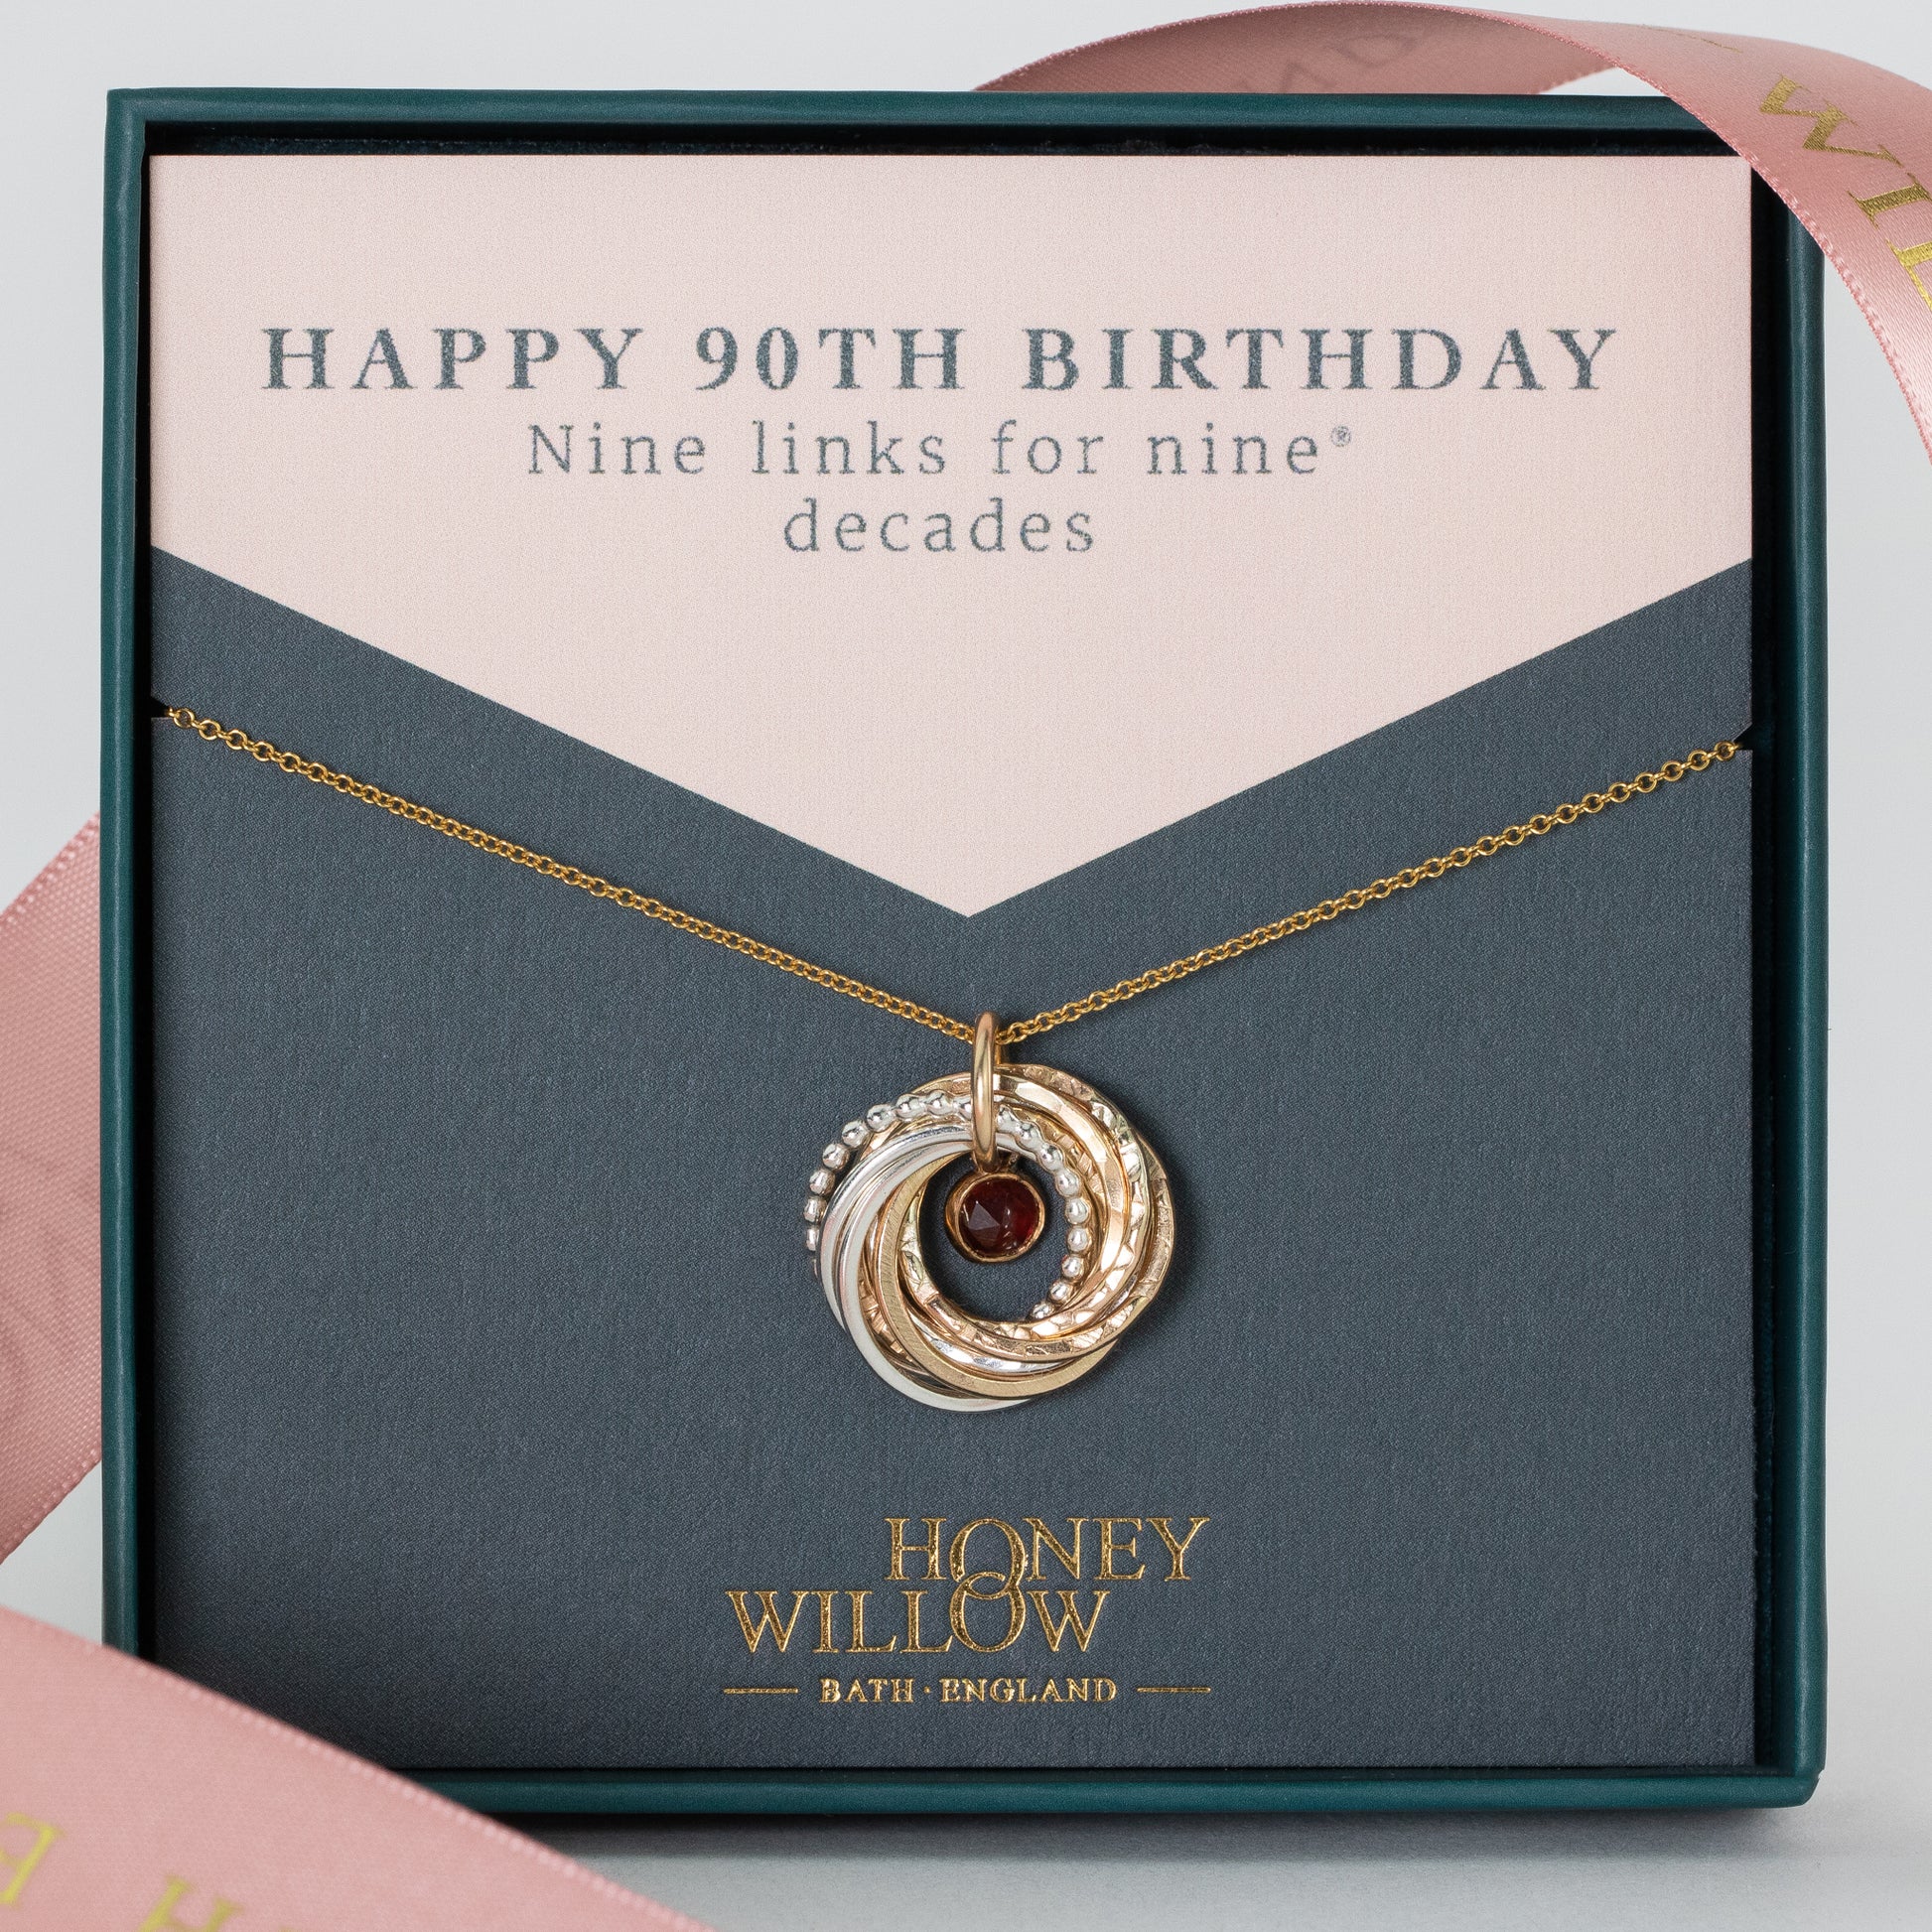 90th Birthday Birthstone Necklace - The Original 9 Links for 9 Decades Necklace - Petite Silver & Gold